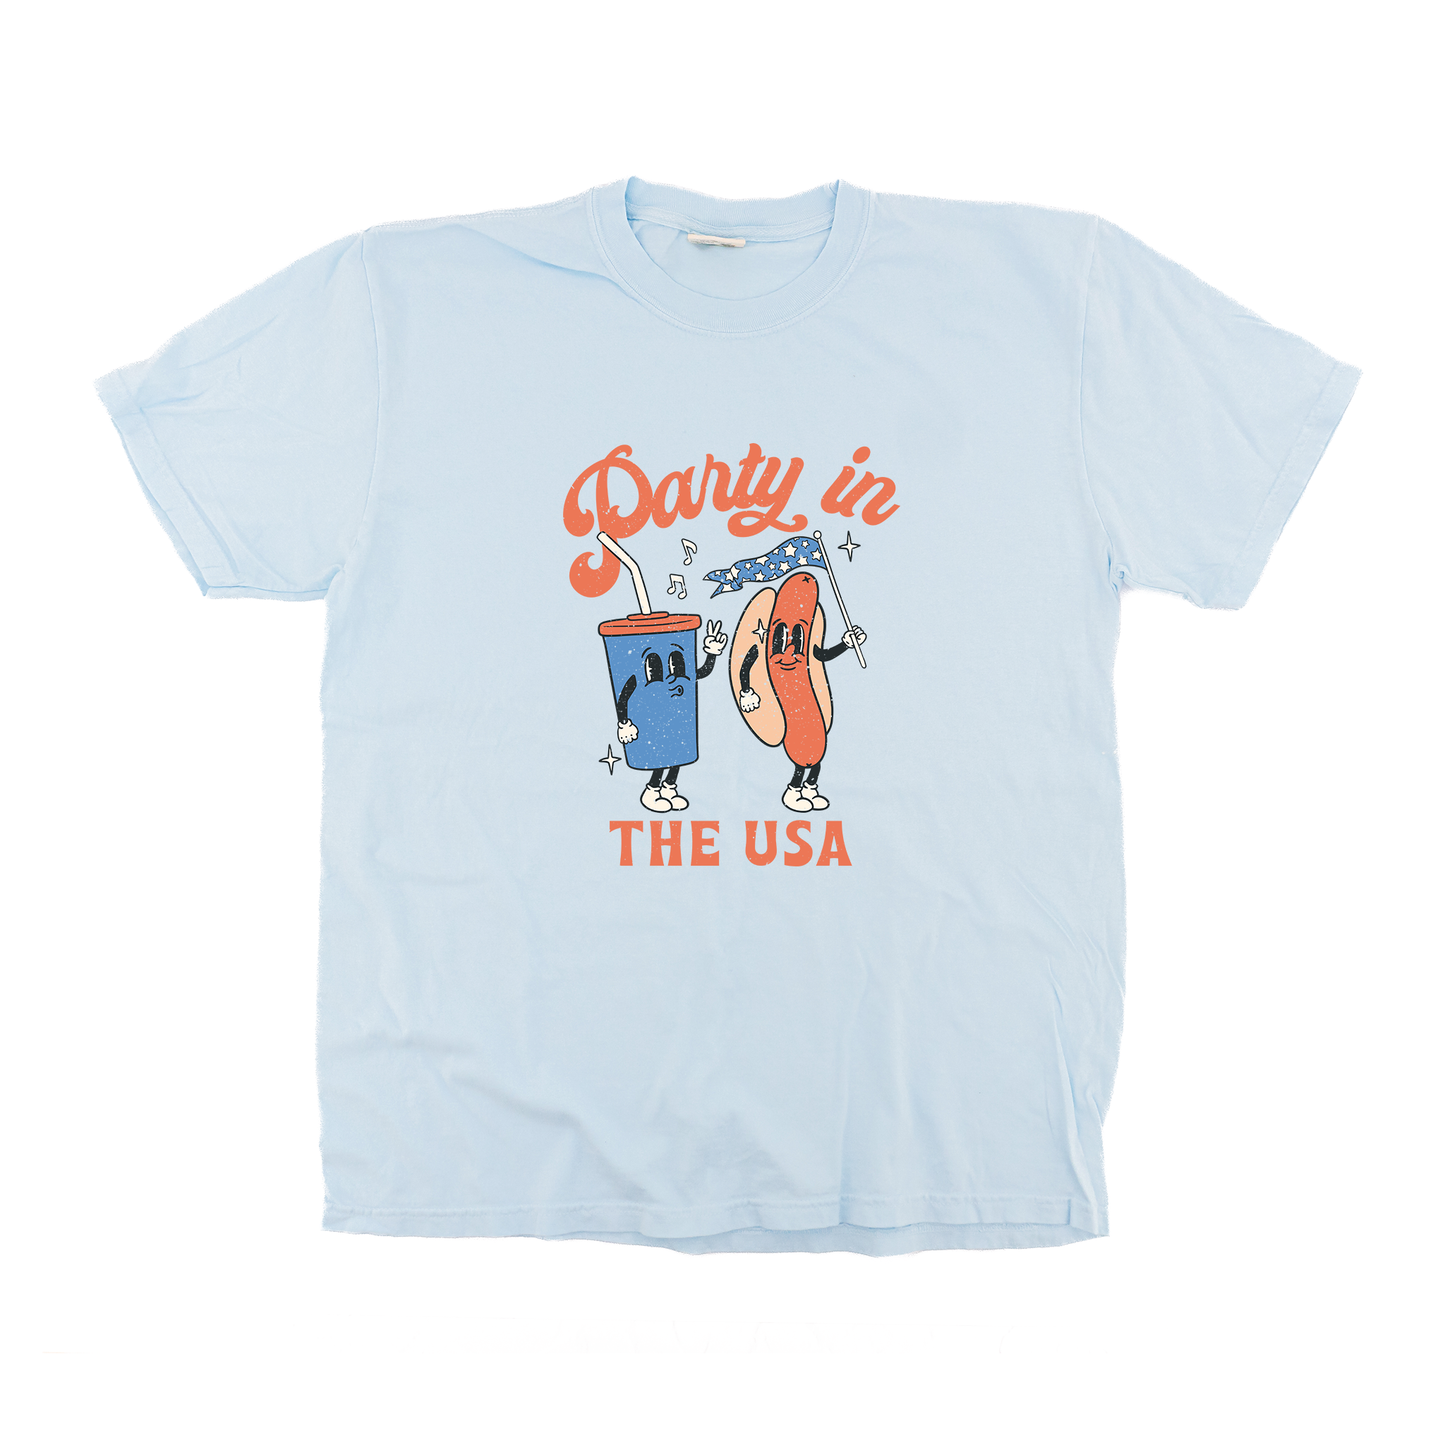 Party in the USA (Ballpark) - Tee (Pale Blue)